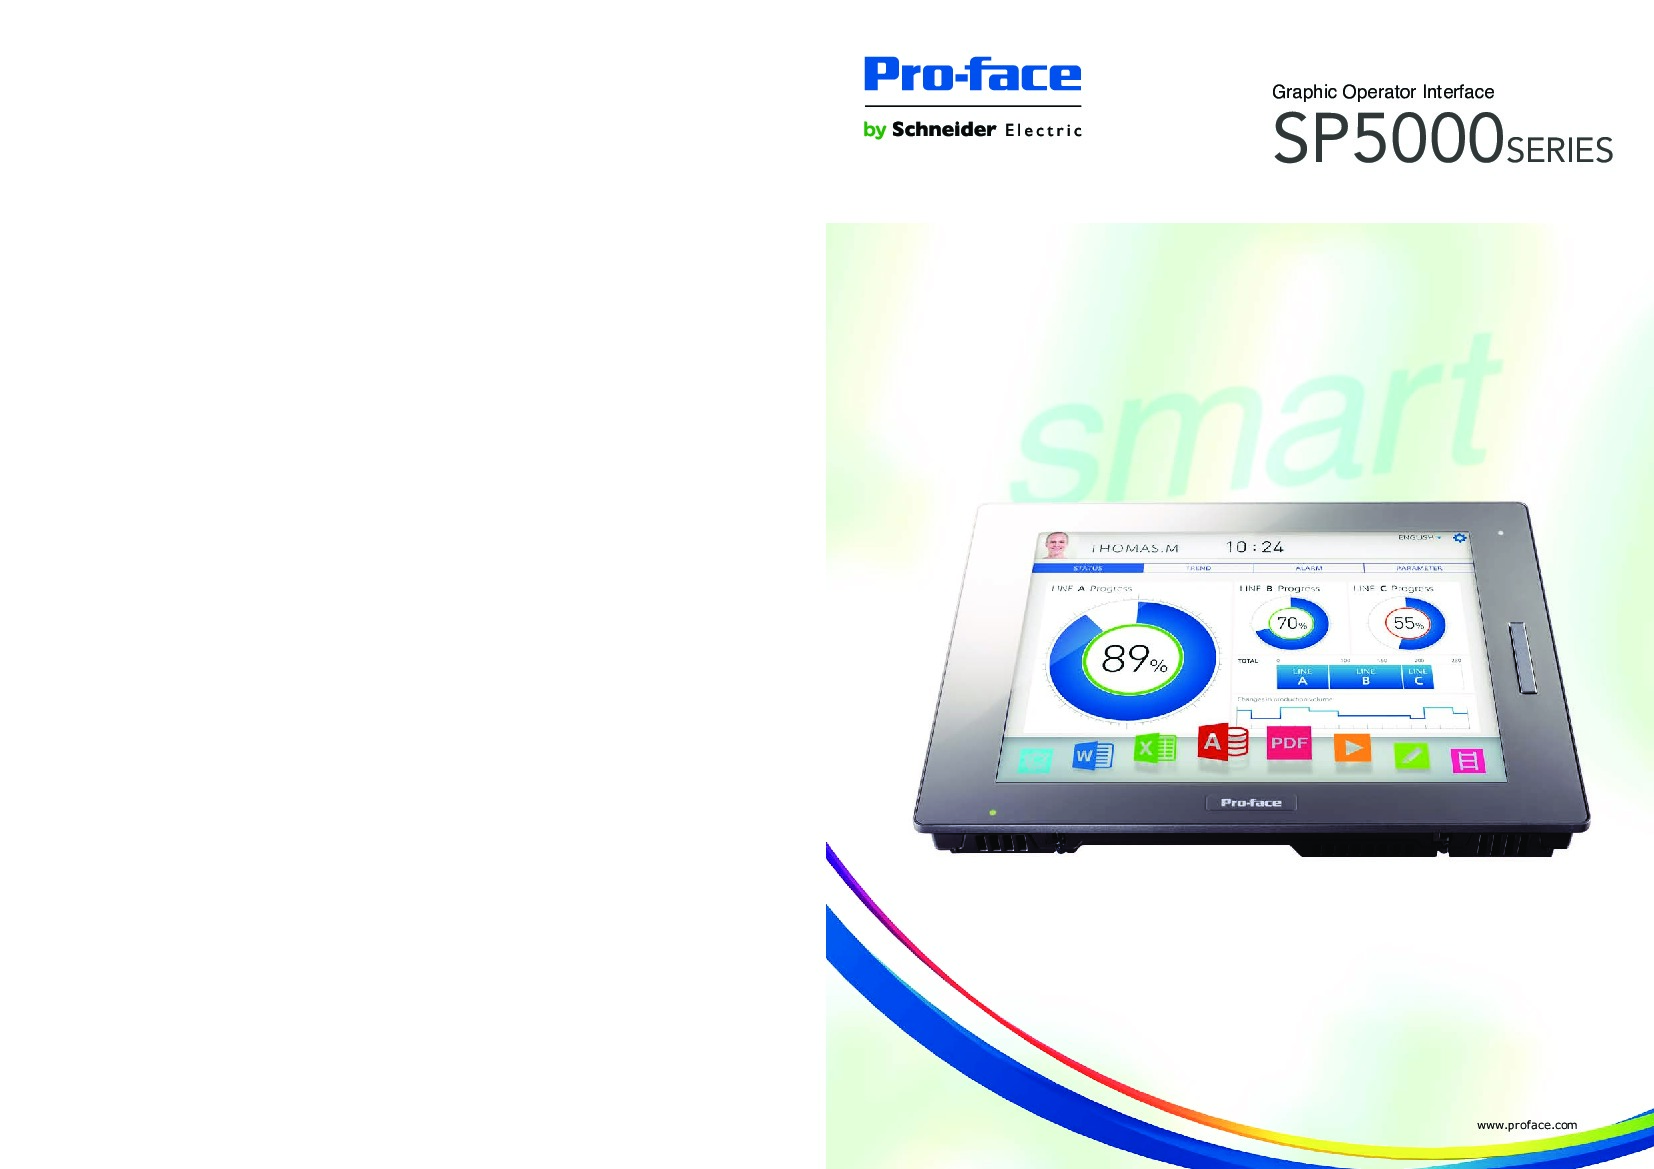 First Page Image of PFXSP5700WCD Pro-face SP5000 Catalog.pdf